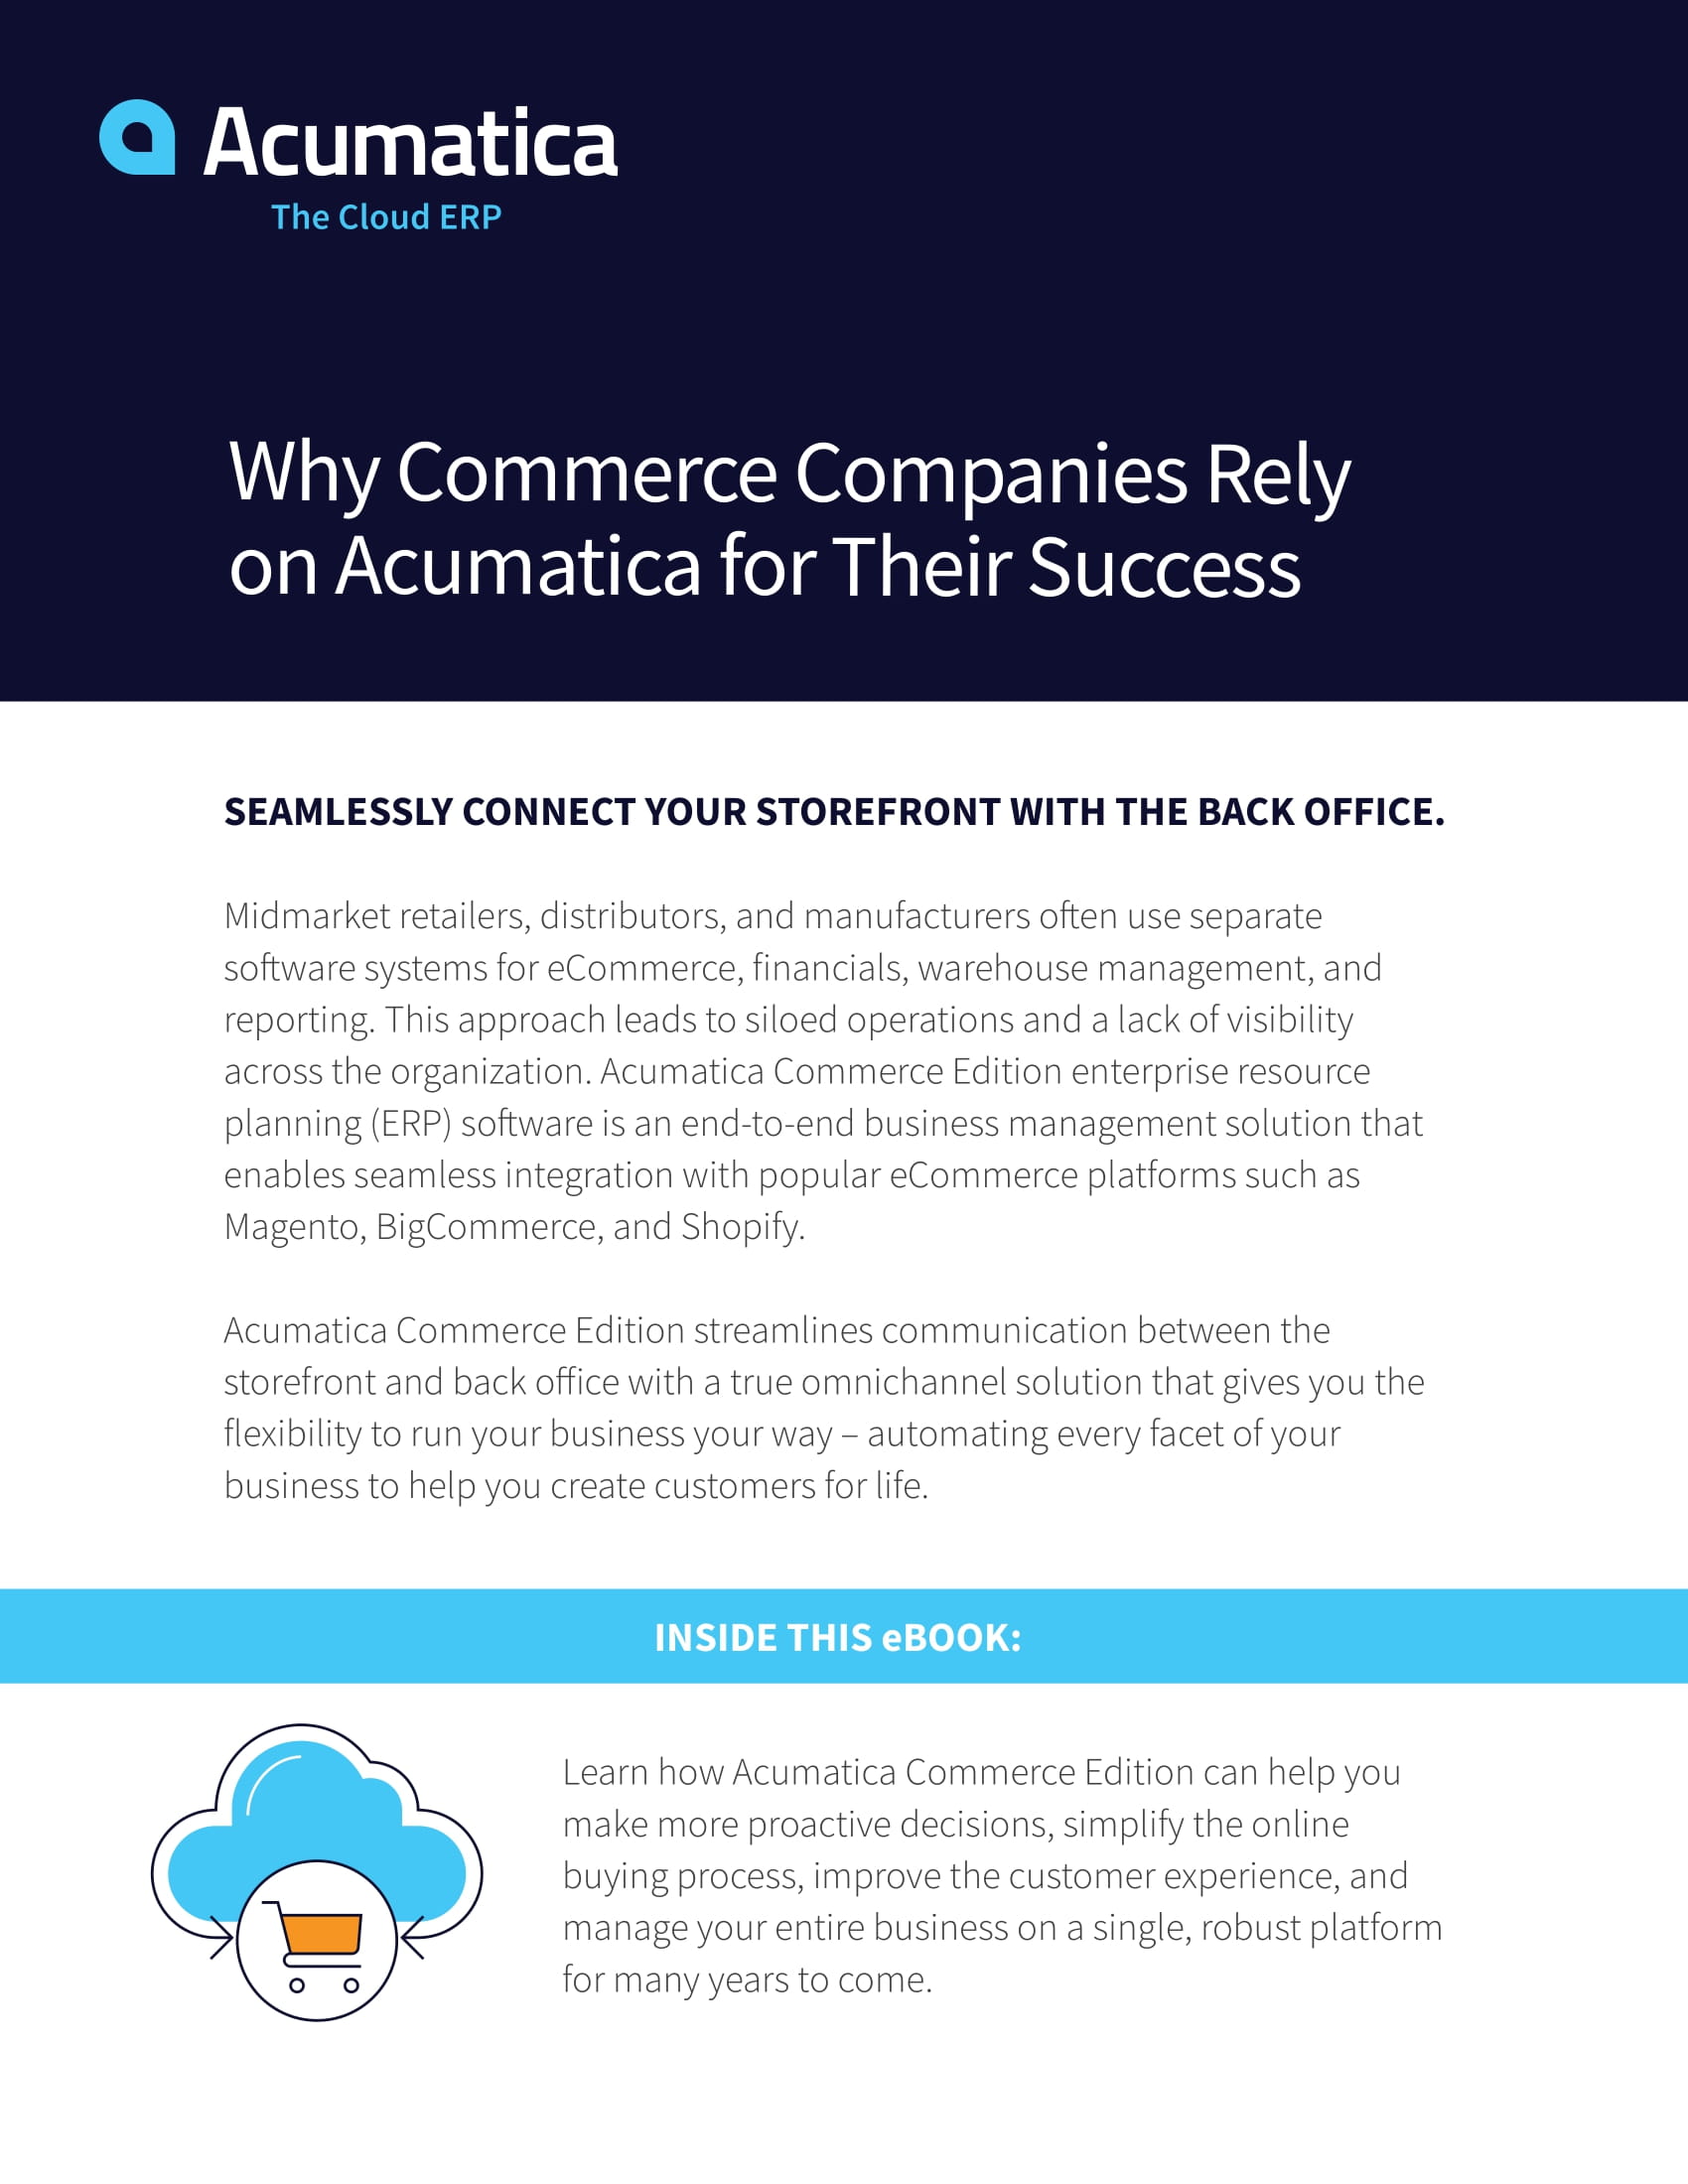 Why Commerce Companies Rely on Acumatica for Their Success